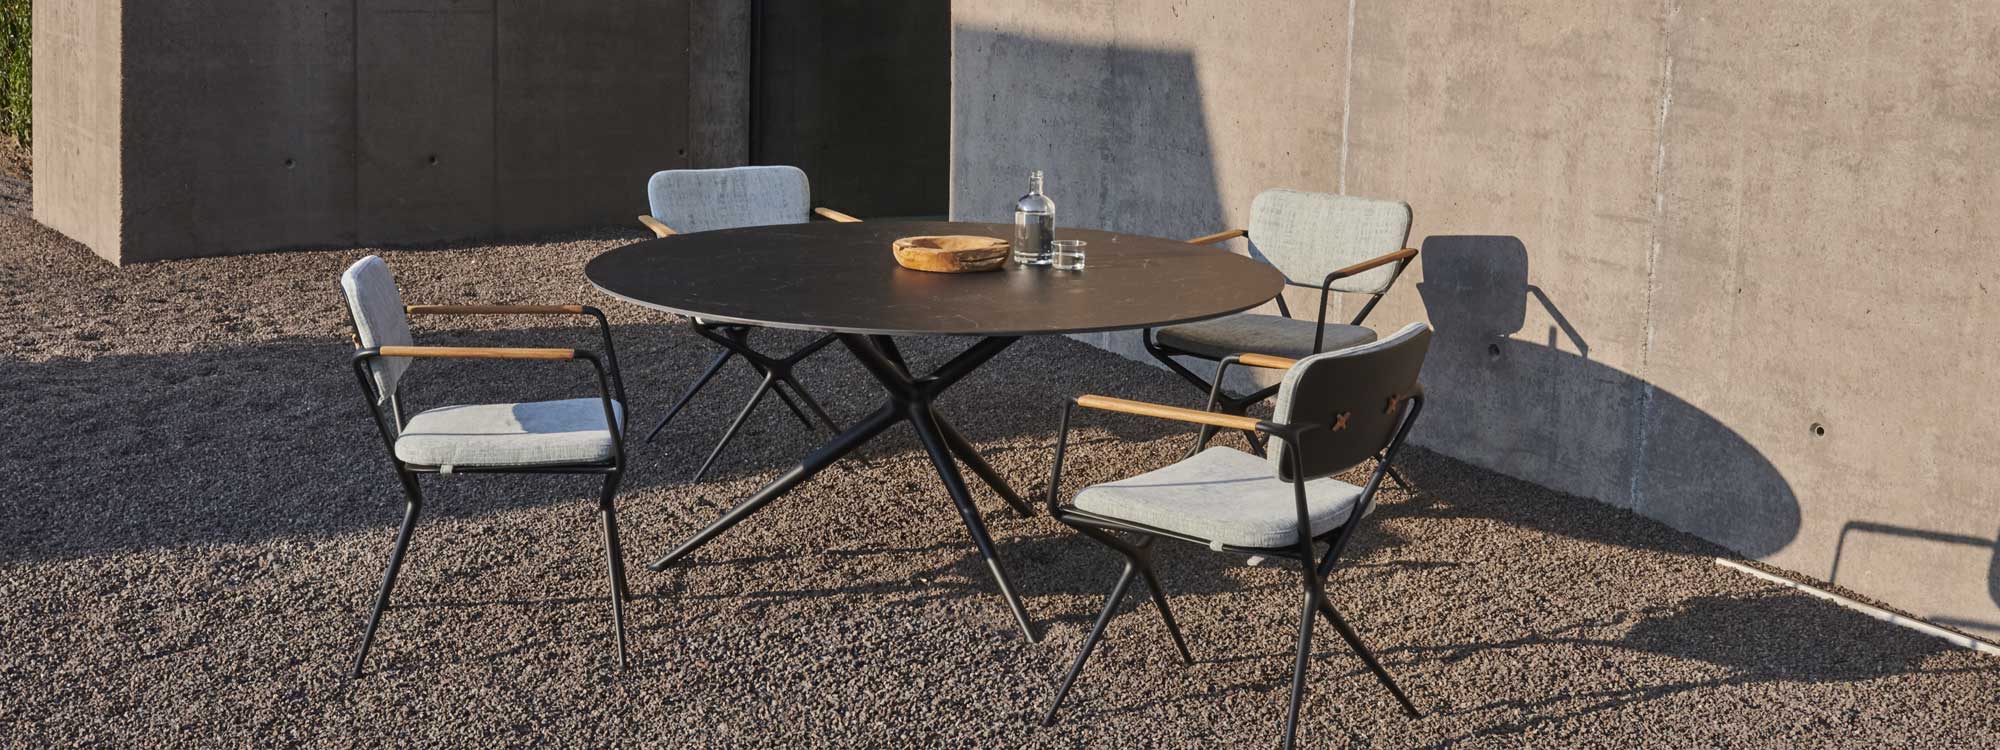 Image of Exes circular garden table with dark marble-effect ceramic top & Exes chairs by Royal Botania